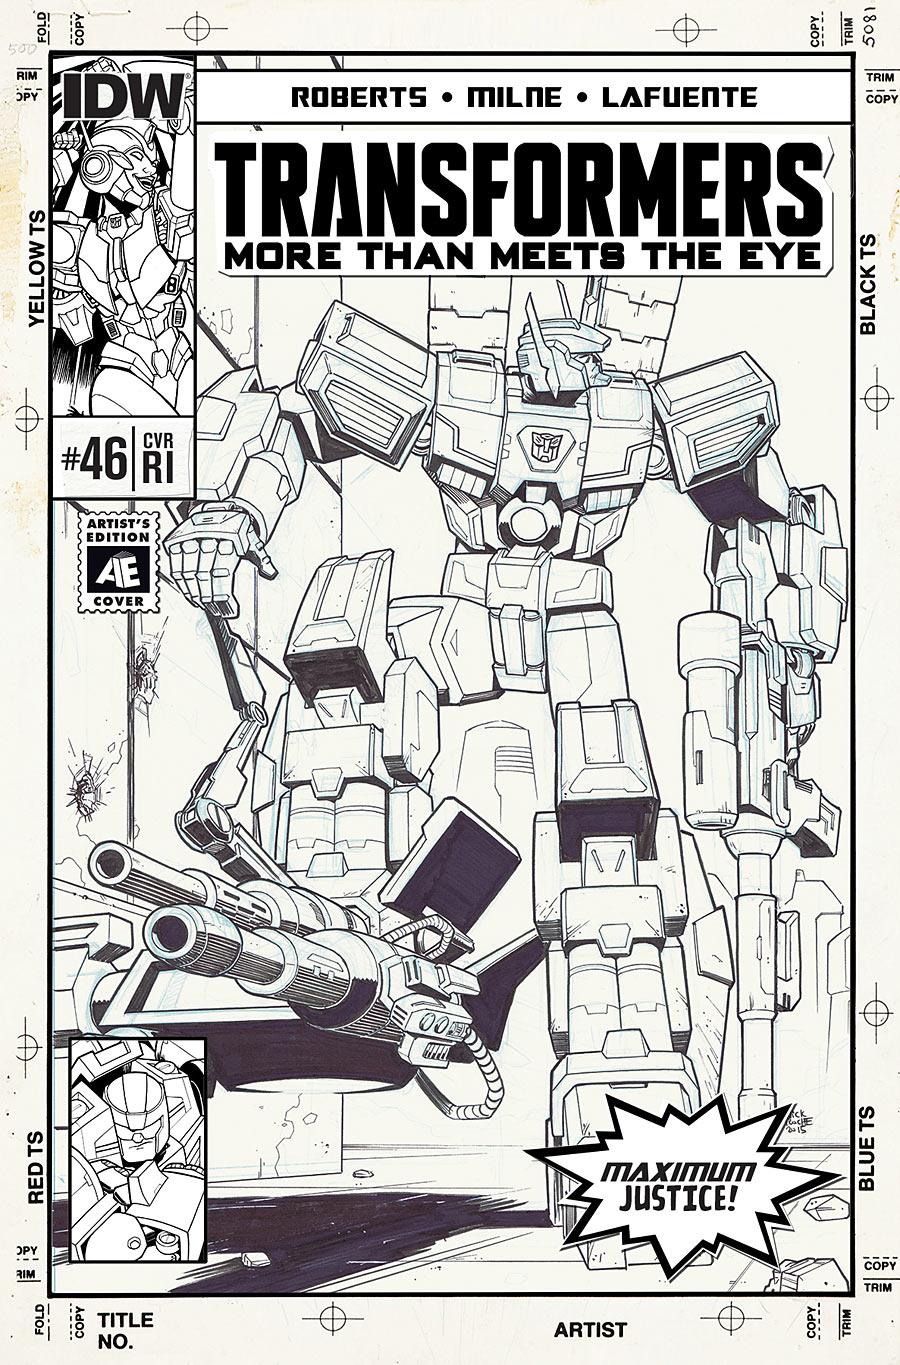 Transformers: More Than Meets the Eye #46—Artist's Edition